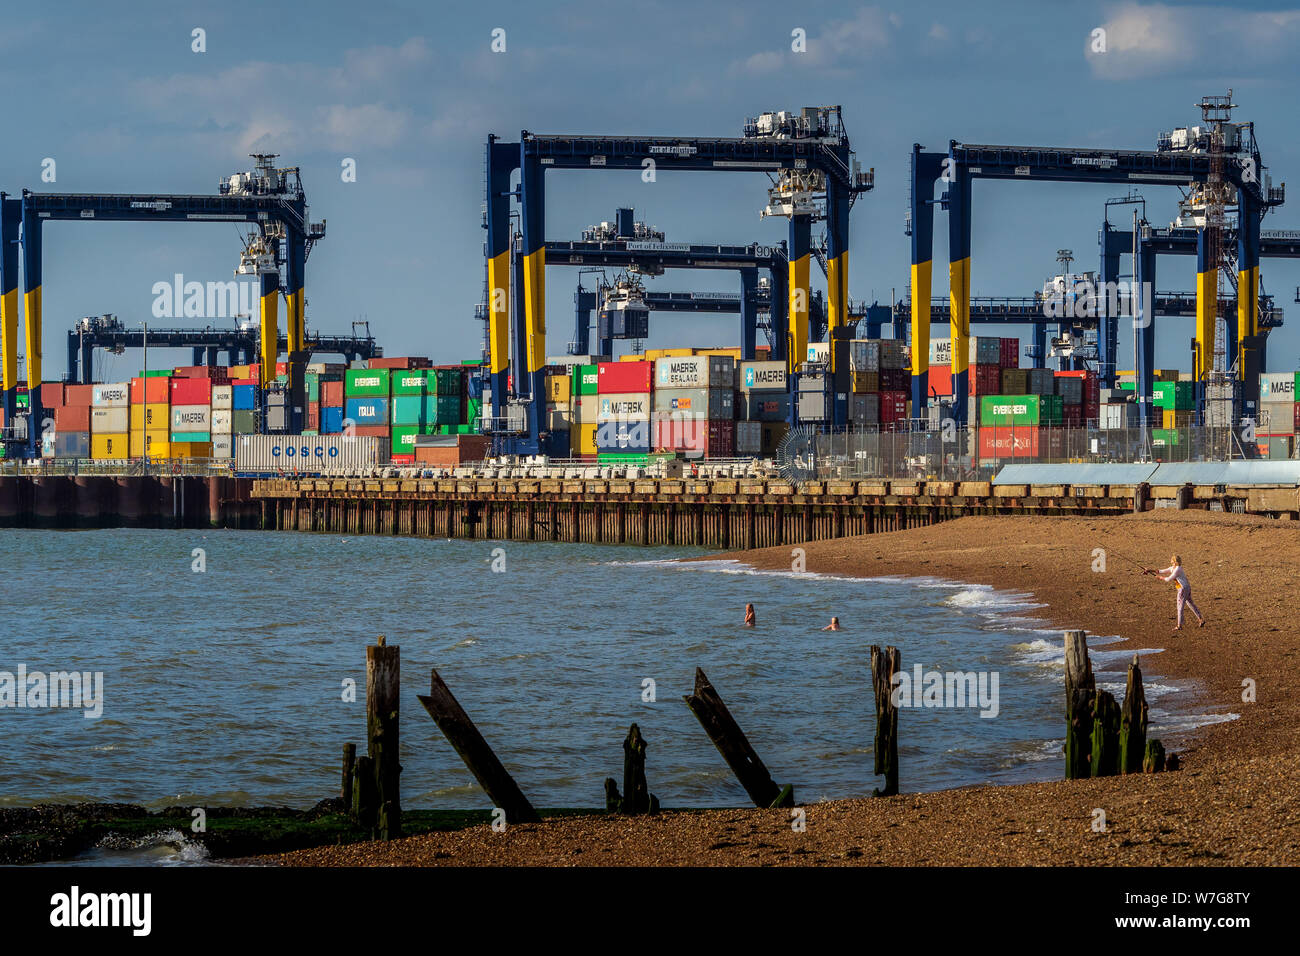 Shippping Containers at Felixstowe Container Port in Suffolk Eastern England. The Port of Felixstowe is the UK's largest Container Port. Stock Photo